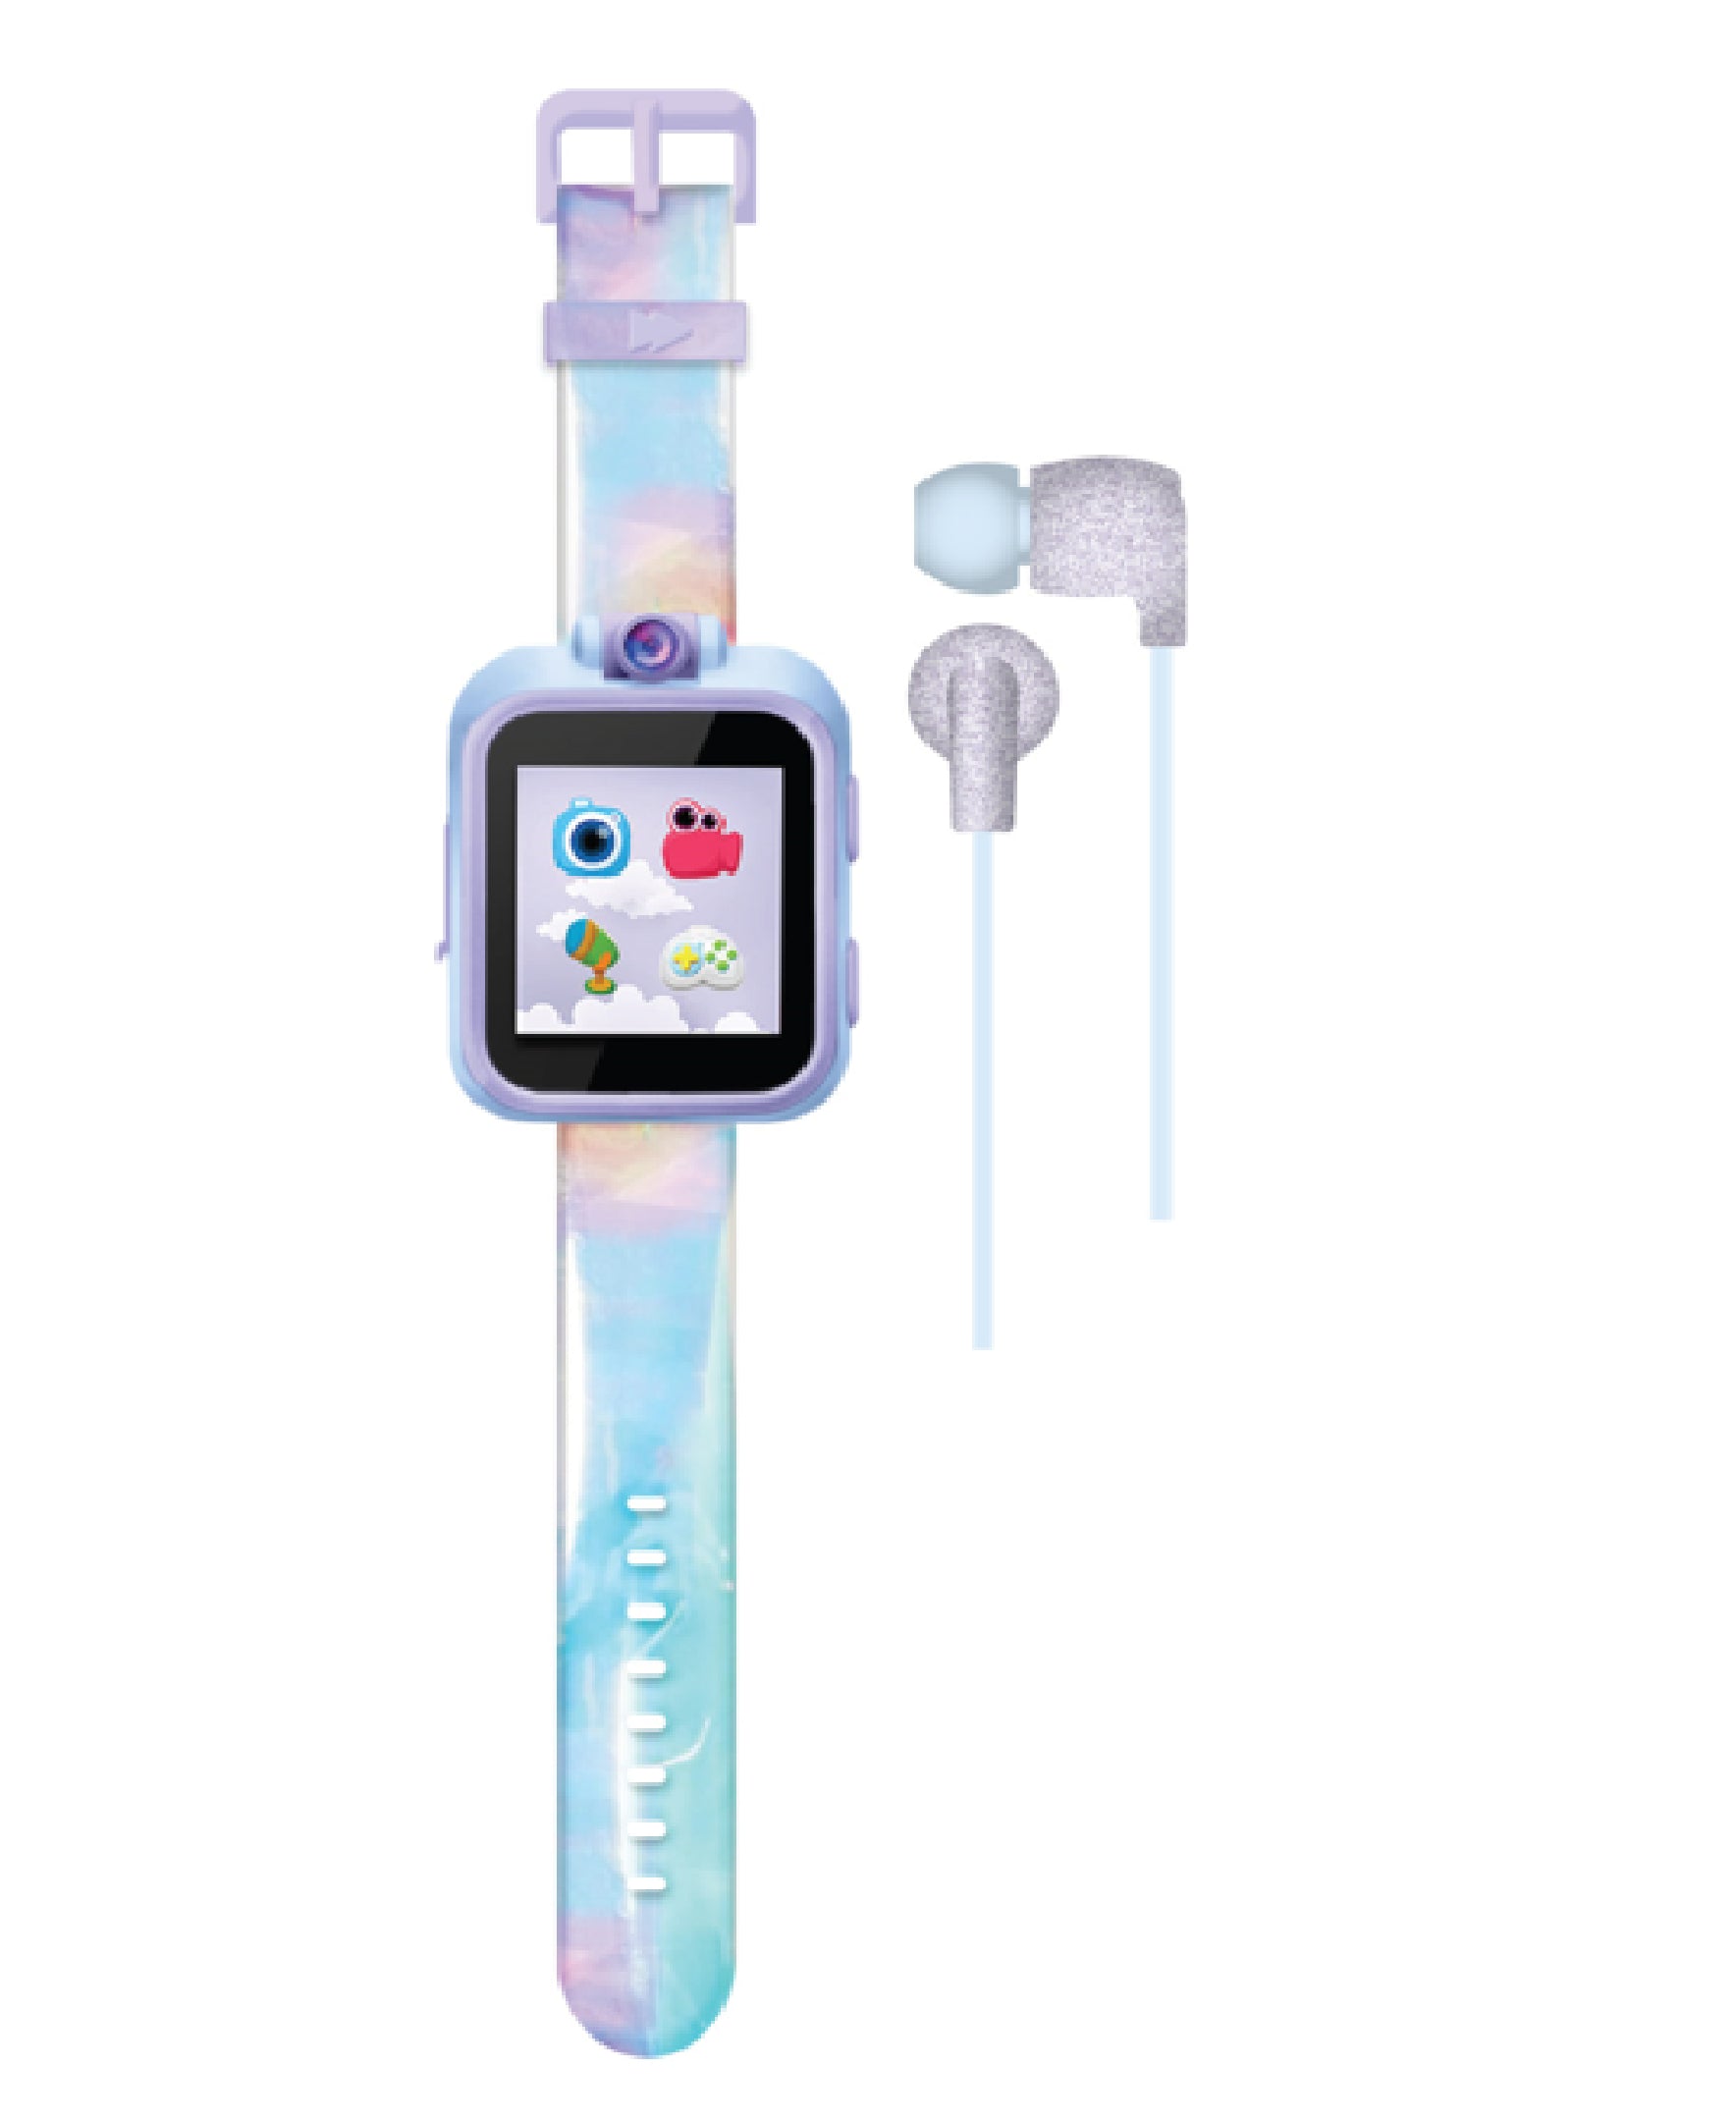 Playzoom 2 Kids Smartwatch & Earbuds Set: Holographic